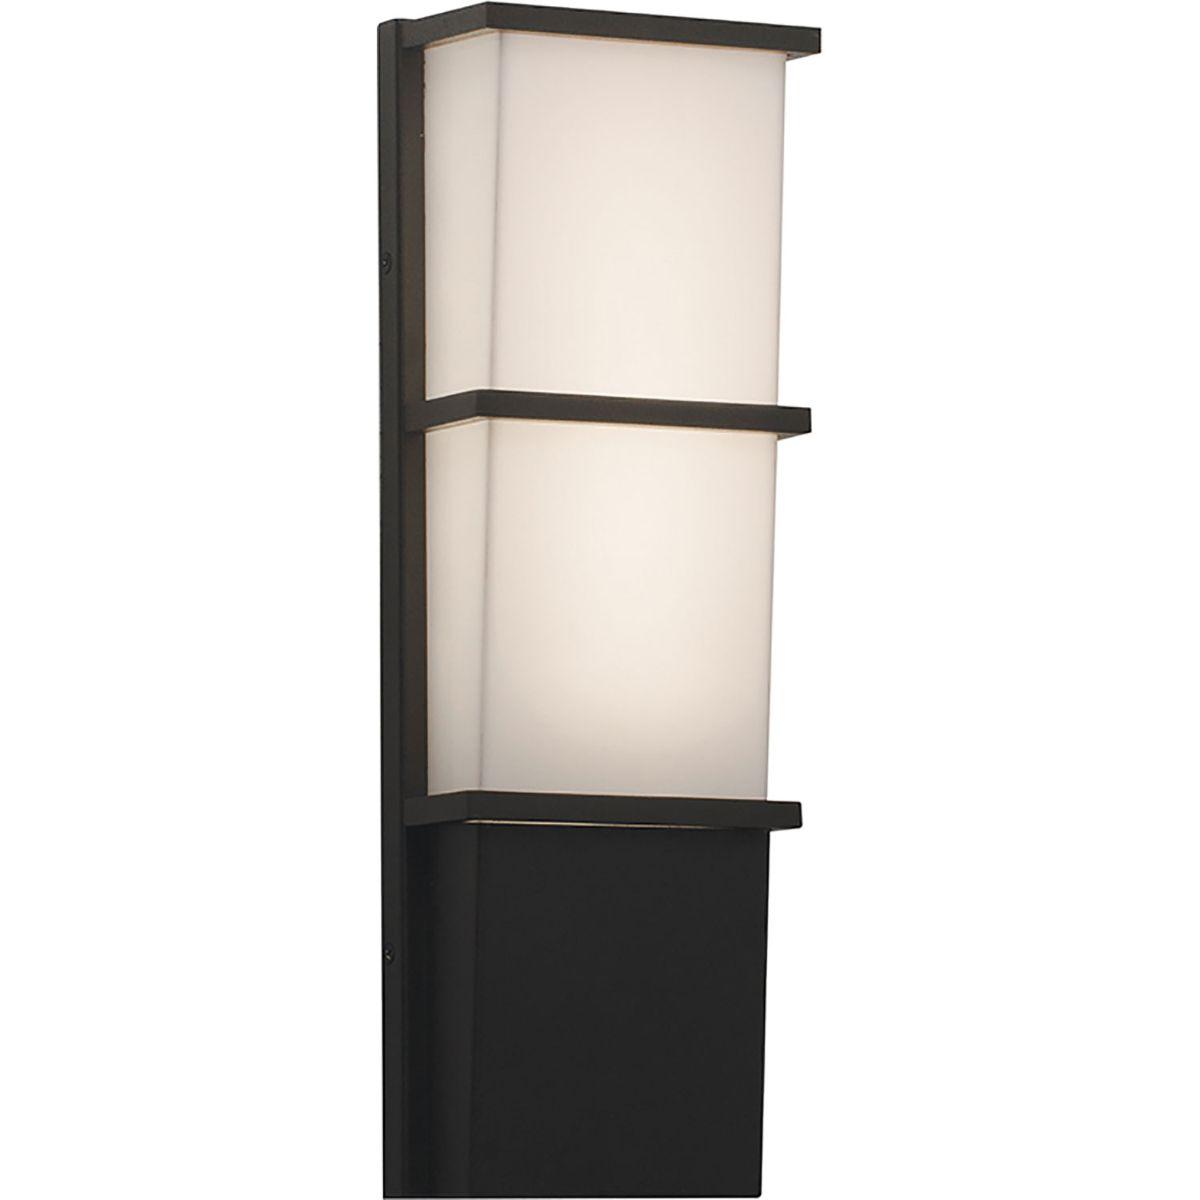 Lasalle 17 in. LED Outdoor Wall Sconce